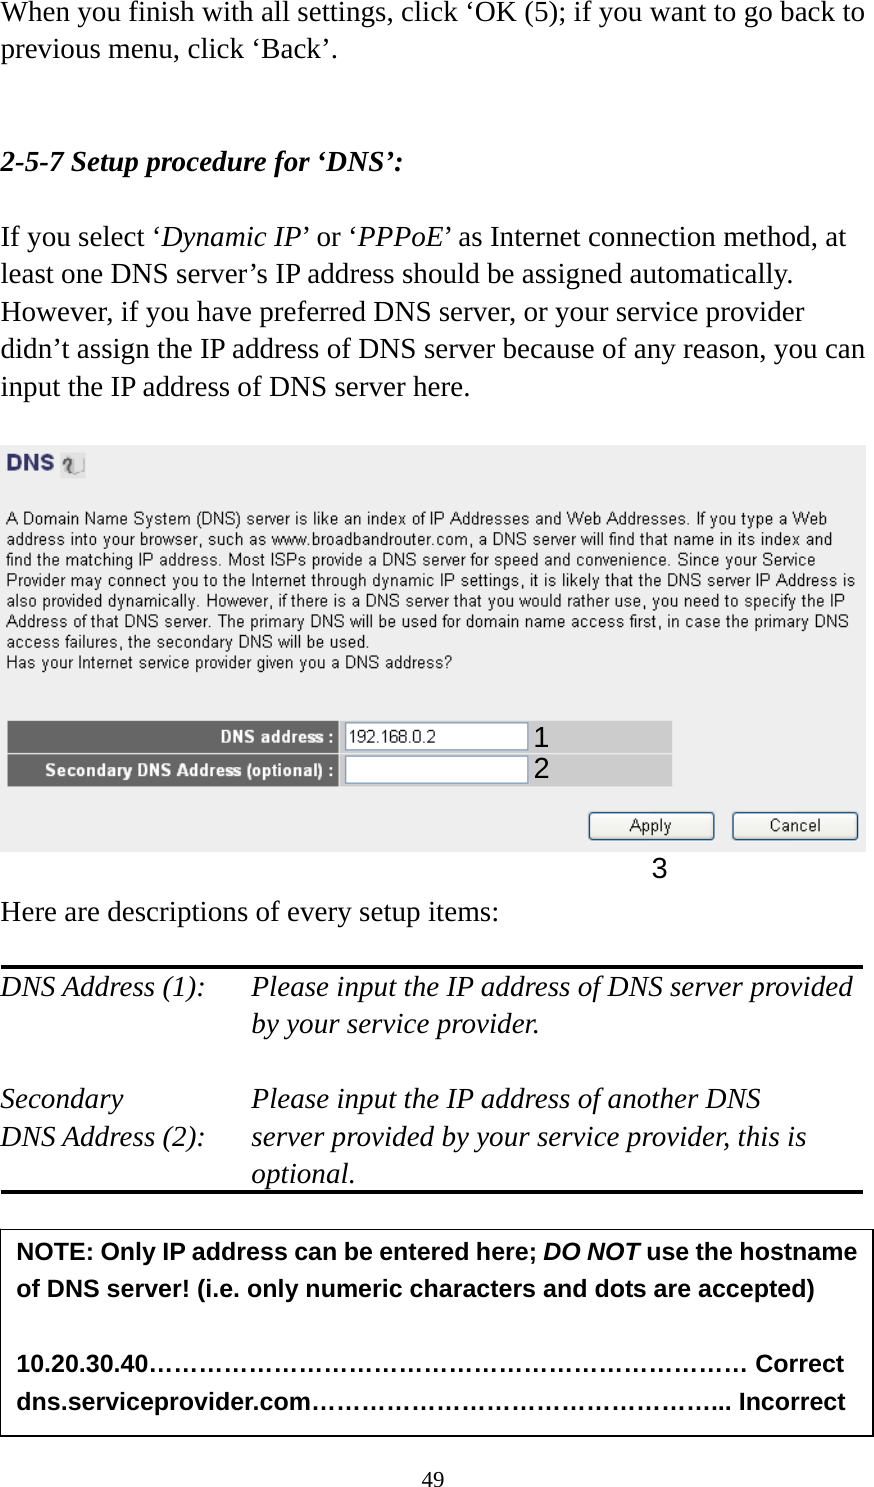 49 When you finish with all settings, click ‘OK (5); if you want to go back to previous menu, click ‘Back’.   2-5-7 Setup procedure for ‘DNS’:  If you select ‘Dynamic IP’ or ‘PPPoE’ as Internet connection method, at least one DNS server’s IP address should be assigned automatically. However, if you have preferred DNS server, or your service provider didn’t assign the IP address of DNS server because of any reason, you can input the IP address of DNS server here.    Here are descriptions of every setup items:  DNS Address (1):    Please input the IP address of DNS server provided by your service provider.  Secondary        Please input the IP address of another DNS DNS Address (2):    server provided by your service provider, this is optional.       NOTE: Only IP address can be entered here; DO NOT use the hostname of DNS server! (i.e. only numeric characters and dots are accepted)  10.20.30.40……………………………………………………………… Correct dns.serviceprovider.com…………………………………………... Incorrect 12 3